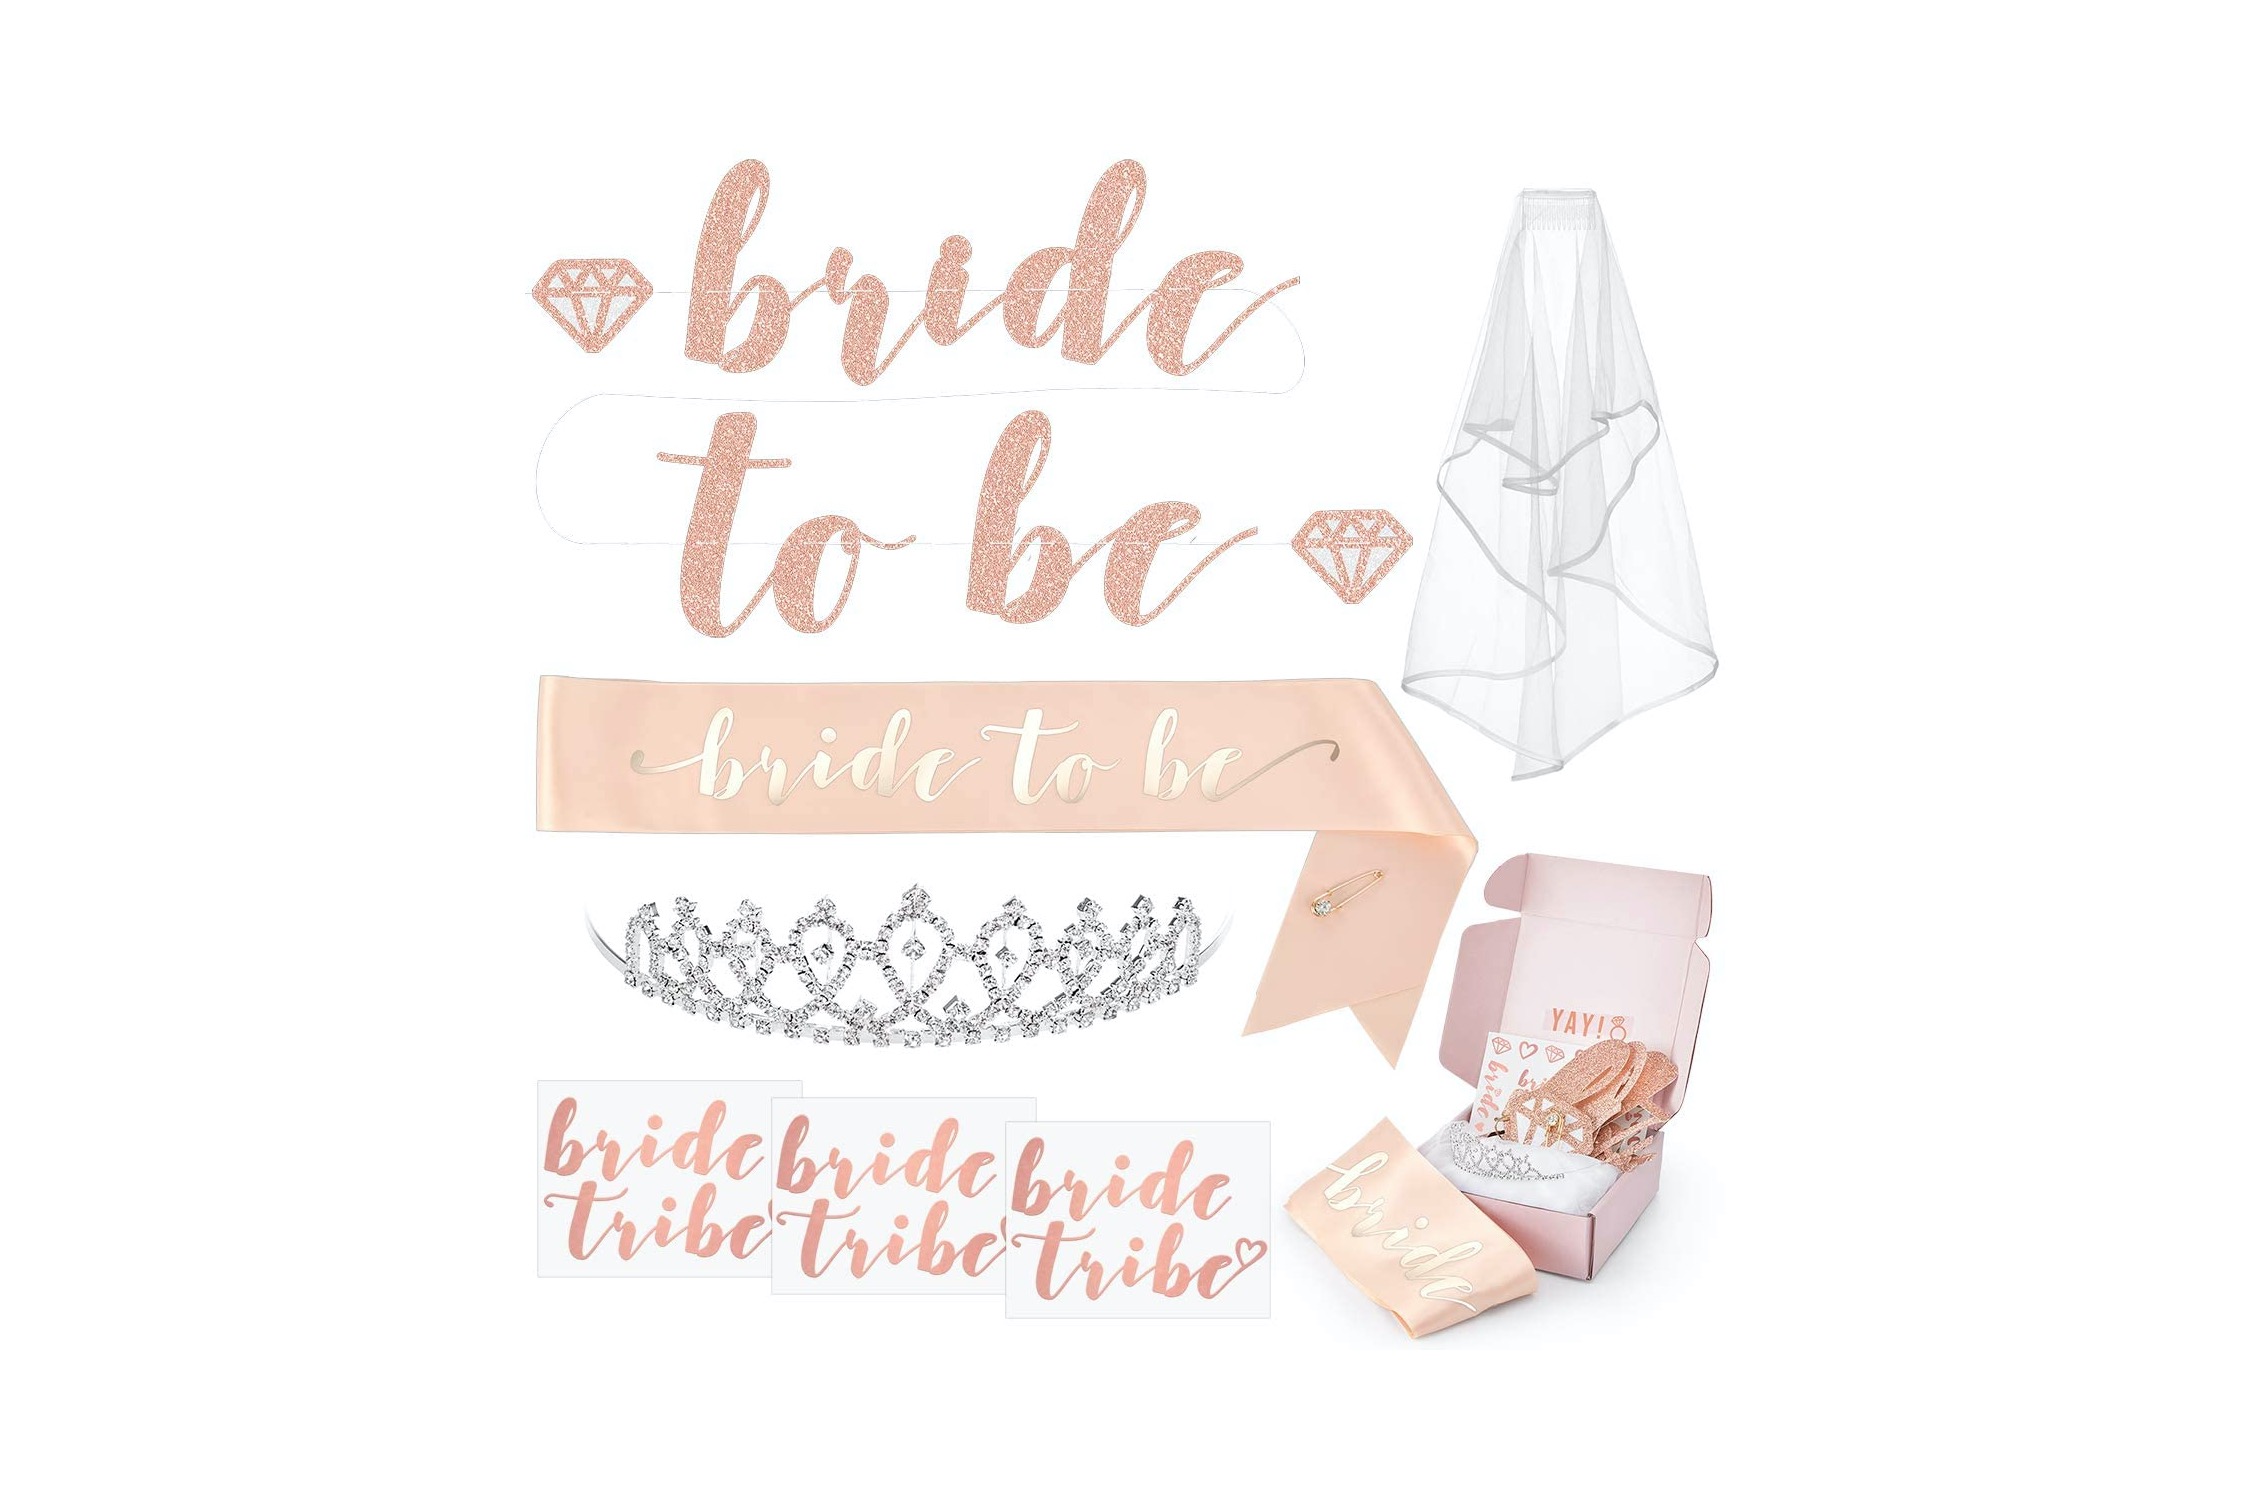 Fancy Bride To Be Sash Kits Bachelorette Party Decorations Bridal Shower  Supplies  Bride To Be Sash, Bridal Tiara, Veil And Bride Tribe Flash  Tattoos Rose Gold 